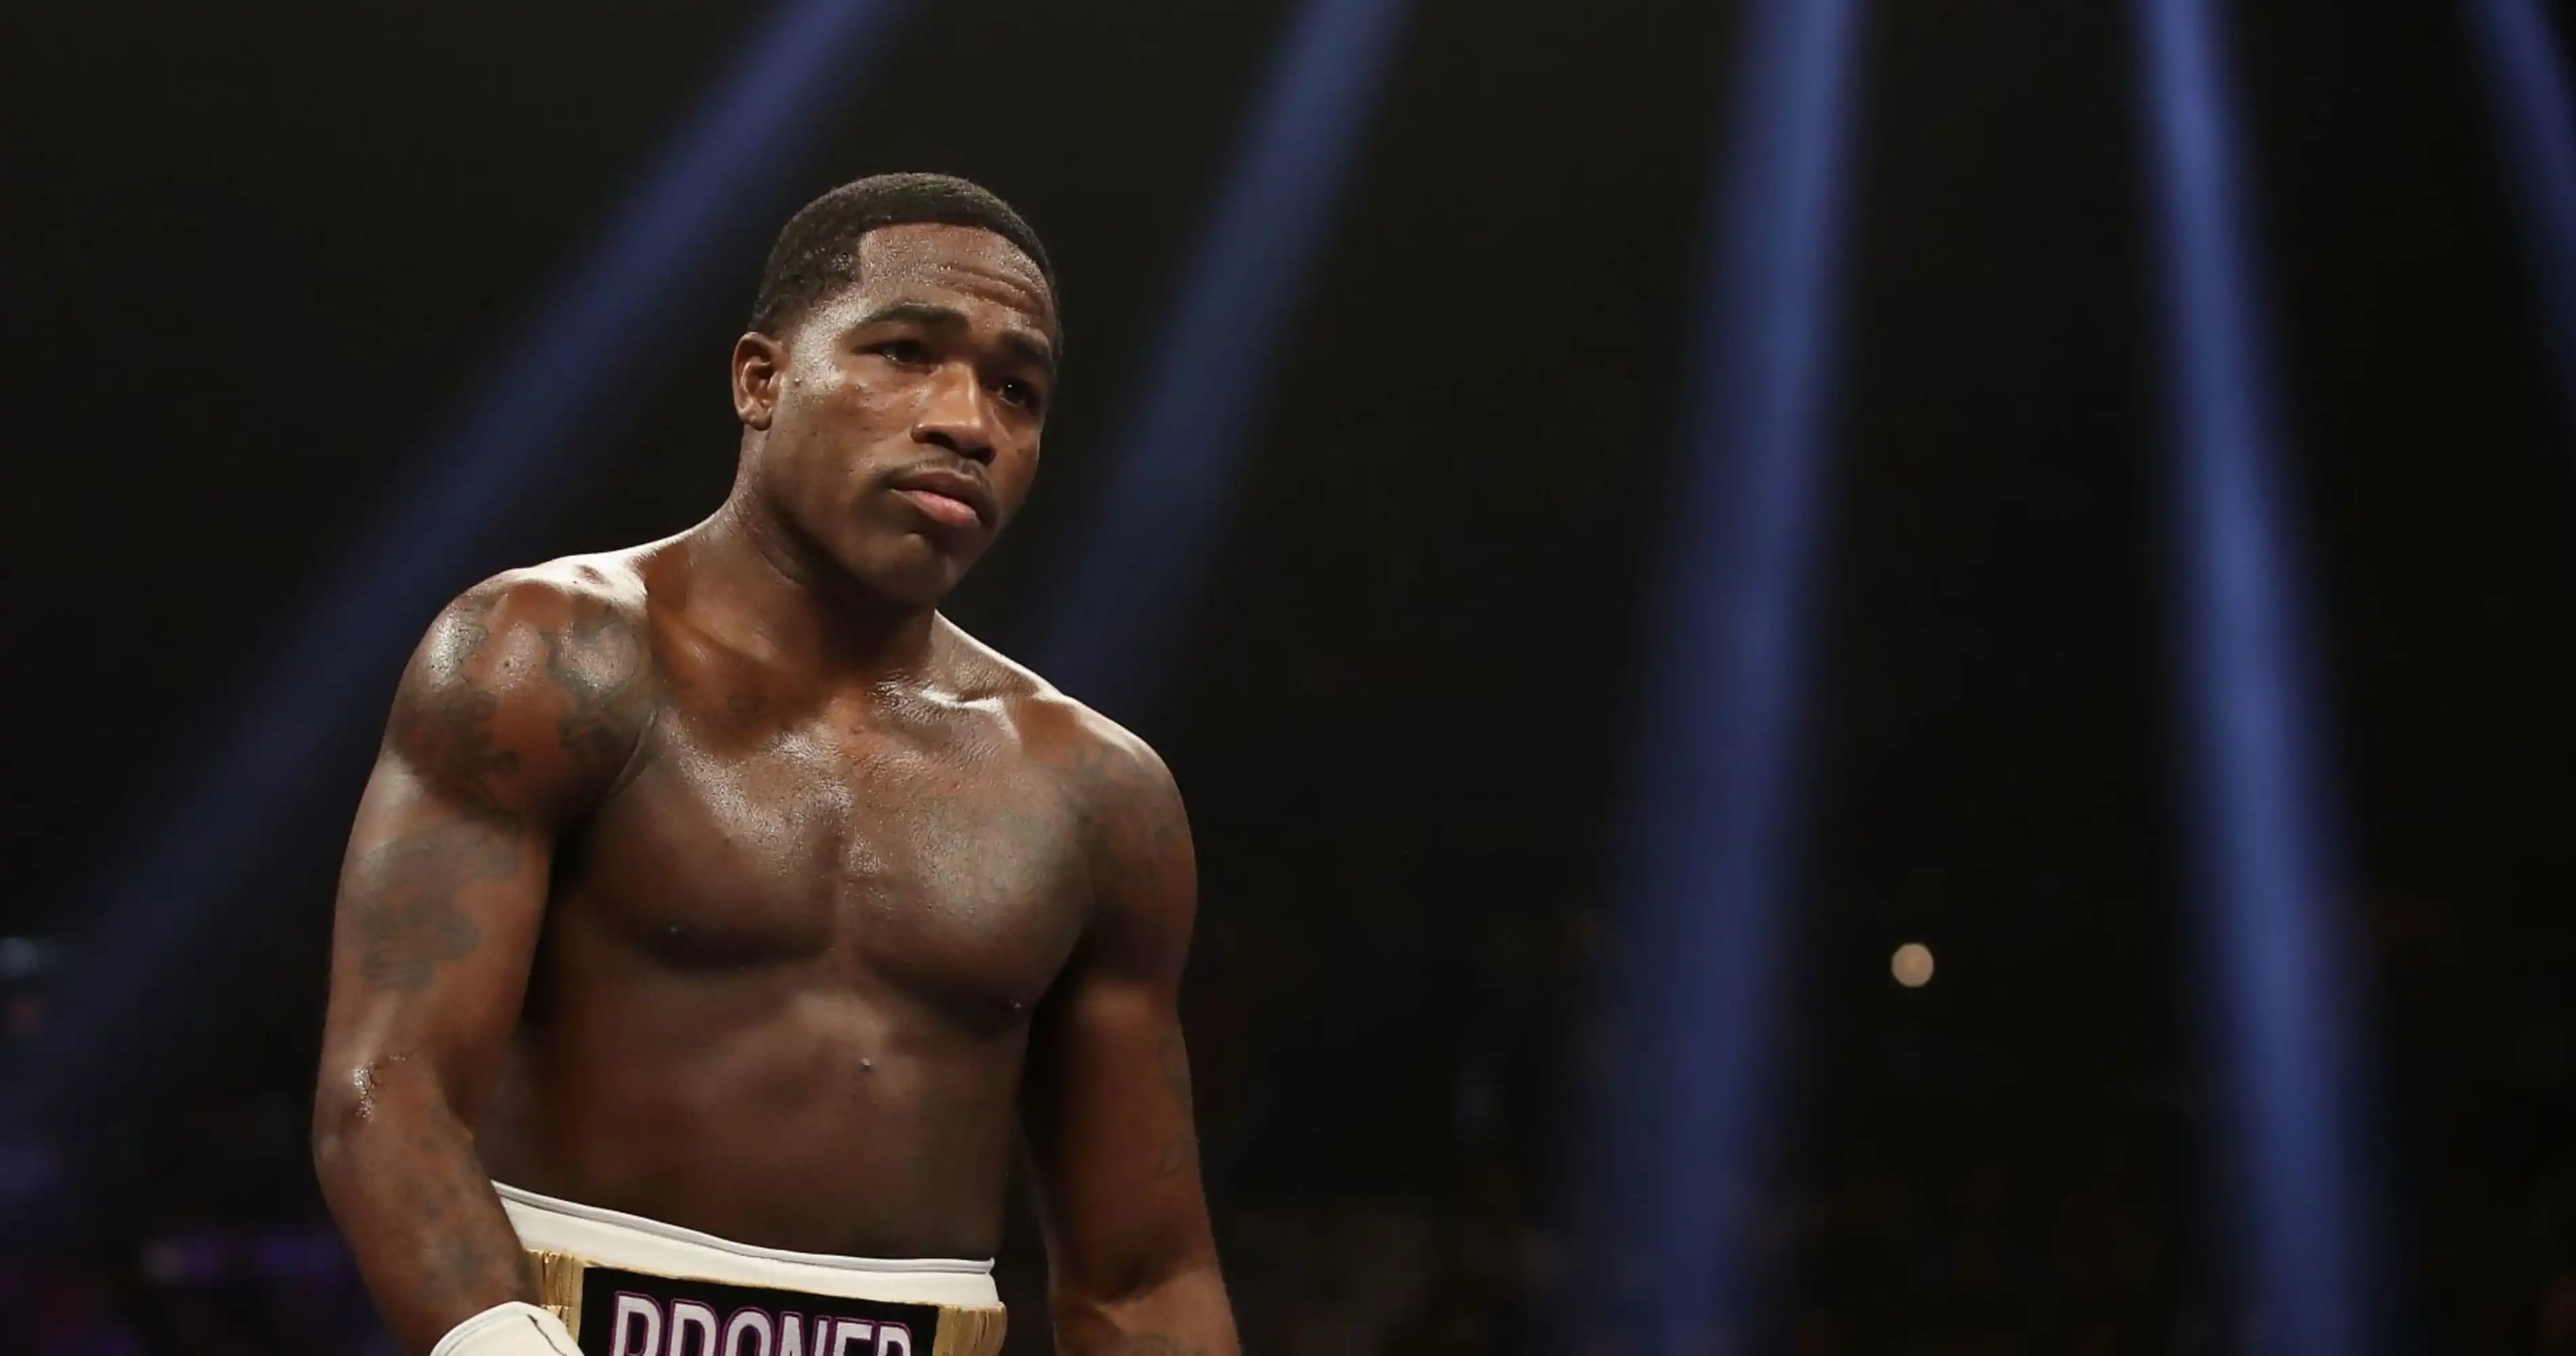 Blair Cobbs defeats Adrien Broner in Welterweight Boxing Match via Unanimous Decision